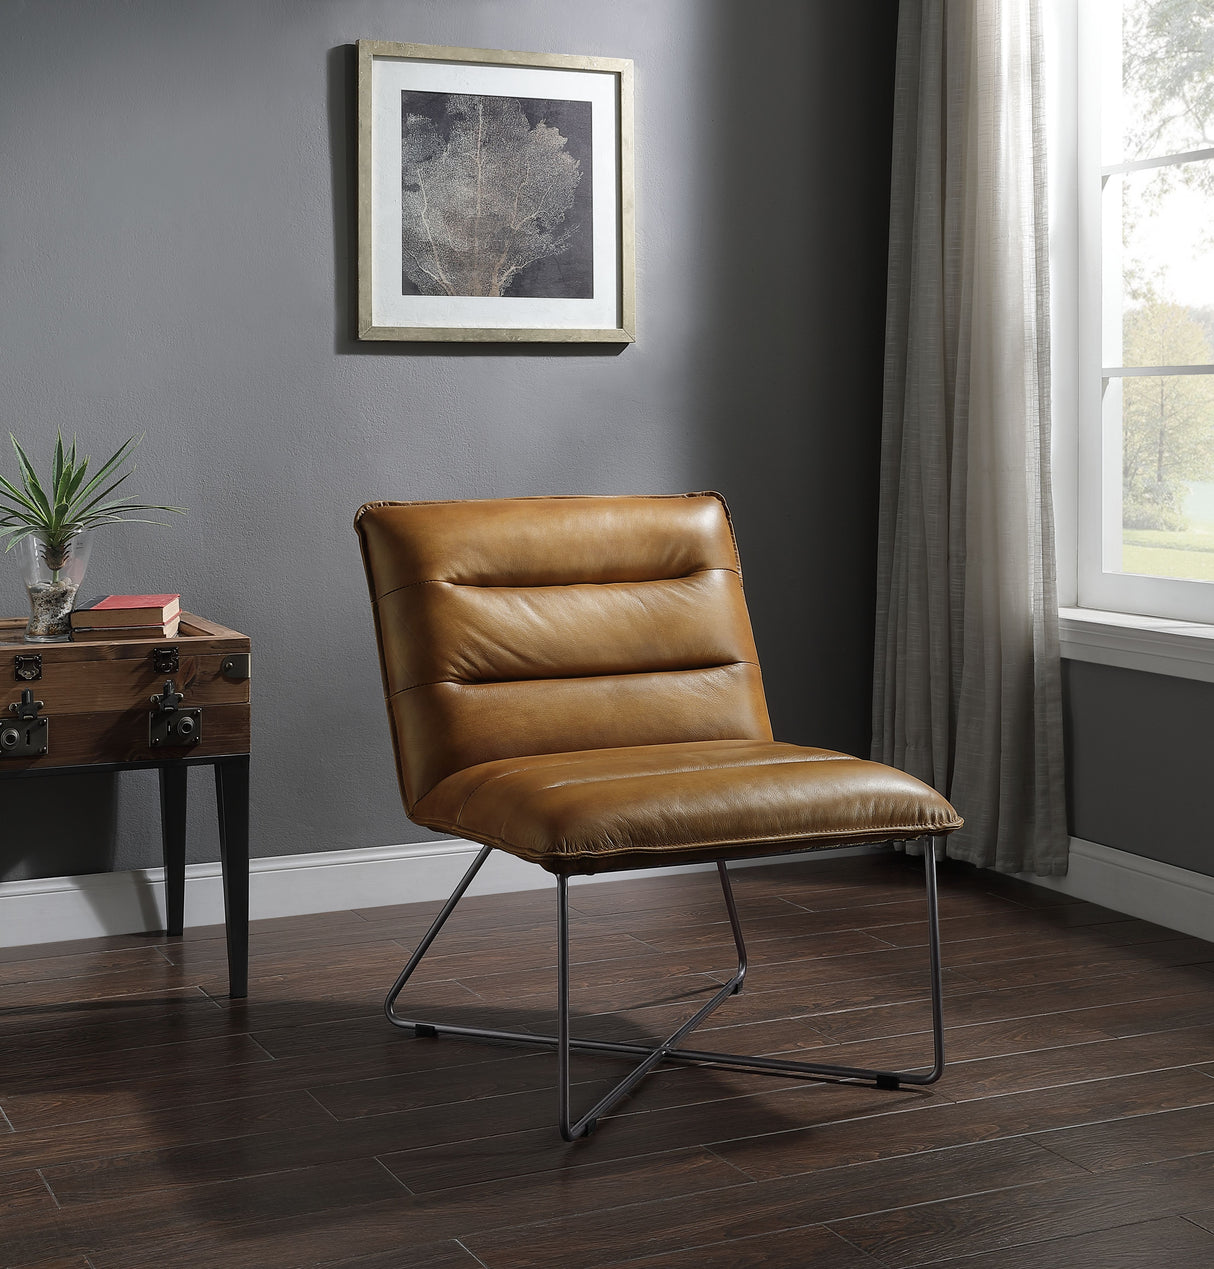 Acme - Balrog Accent Chair 59671 Saddle Brown Top Grain Leather